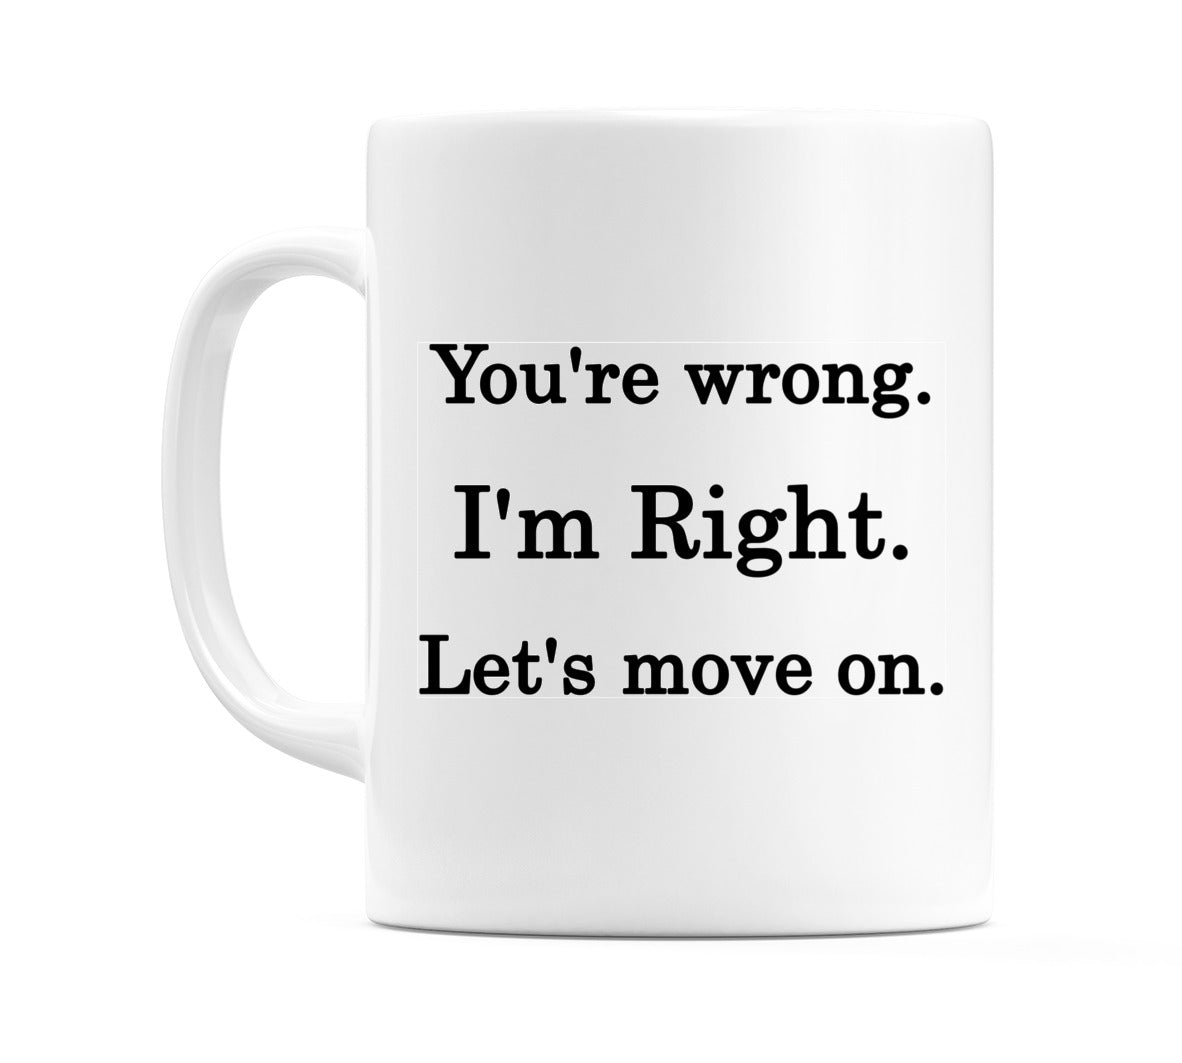 You're wrong. I'm Right. Let's move on. Mug